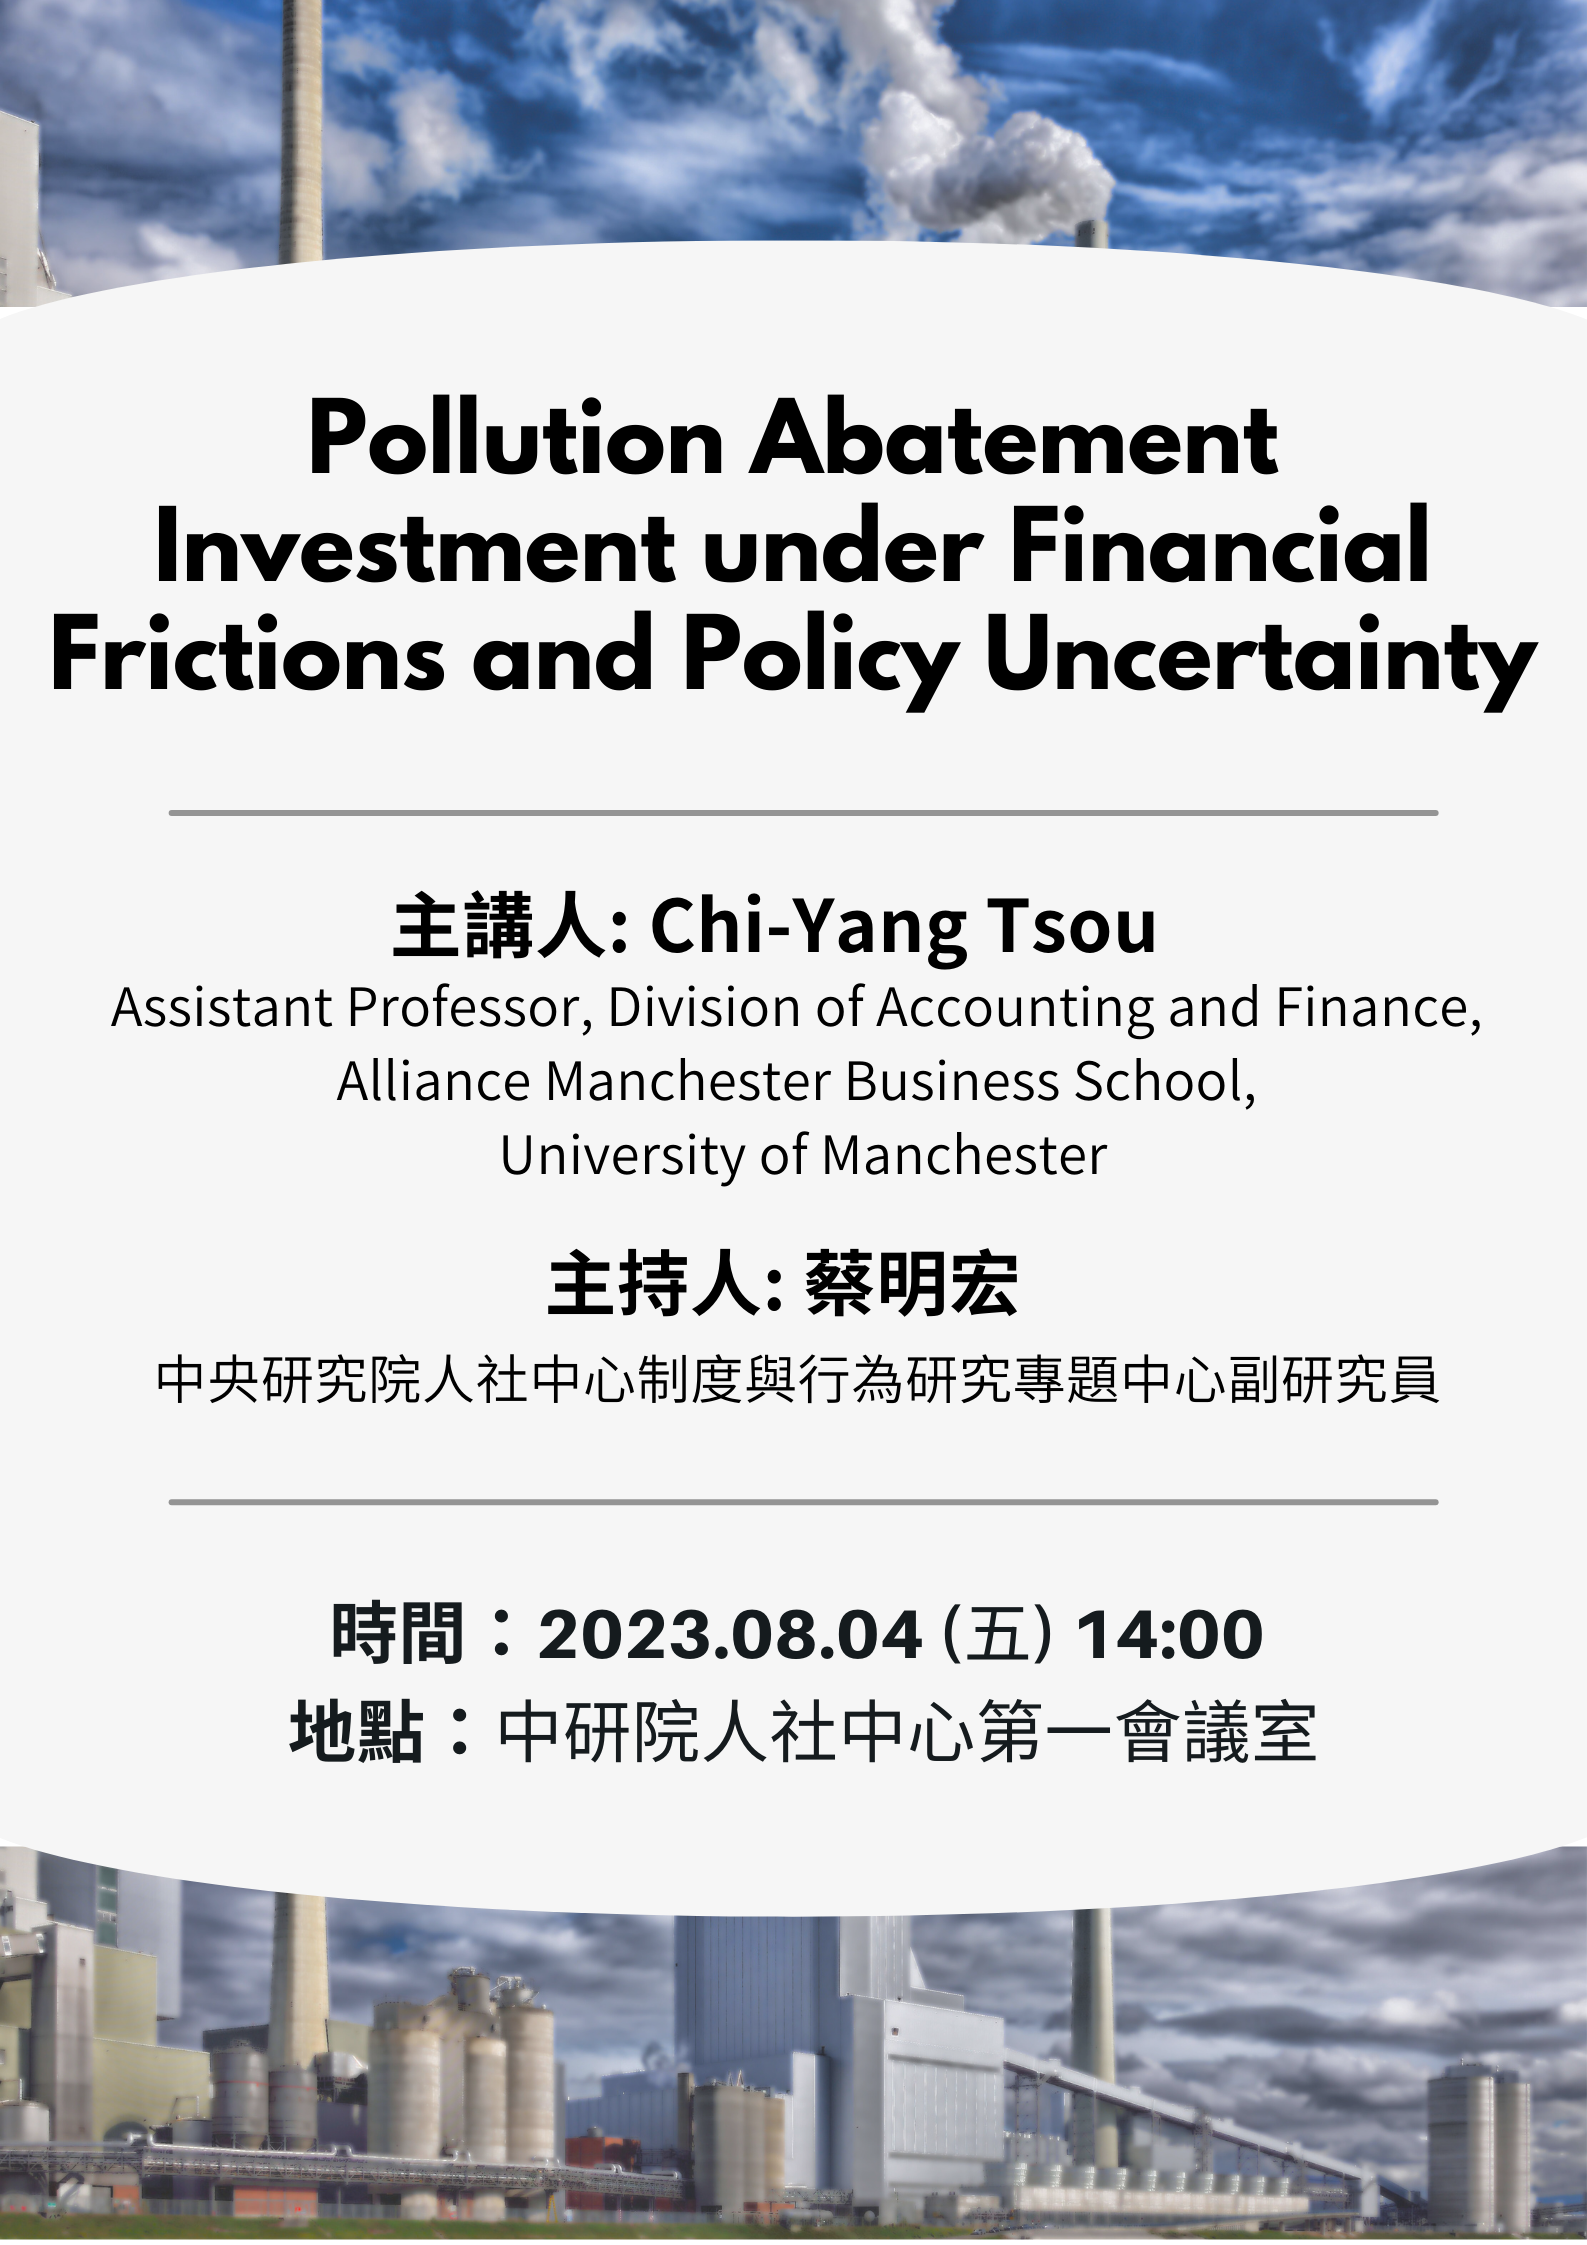 Pollution_Abatement_Investment_under_Financial_Frictions_and_Policy_Uncertainty.png